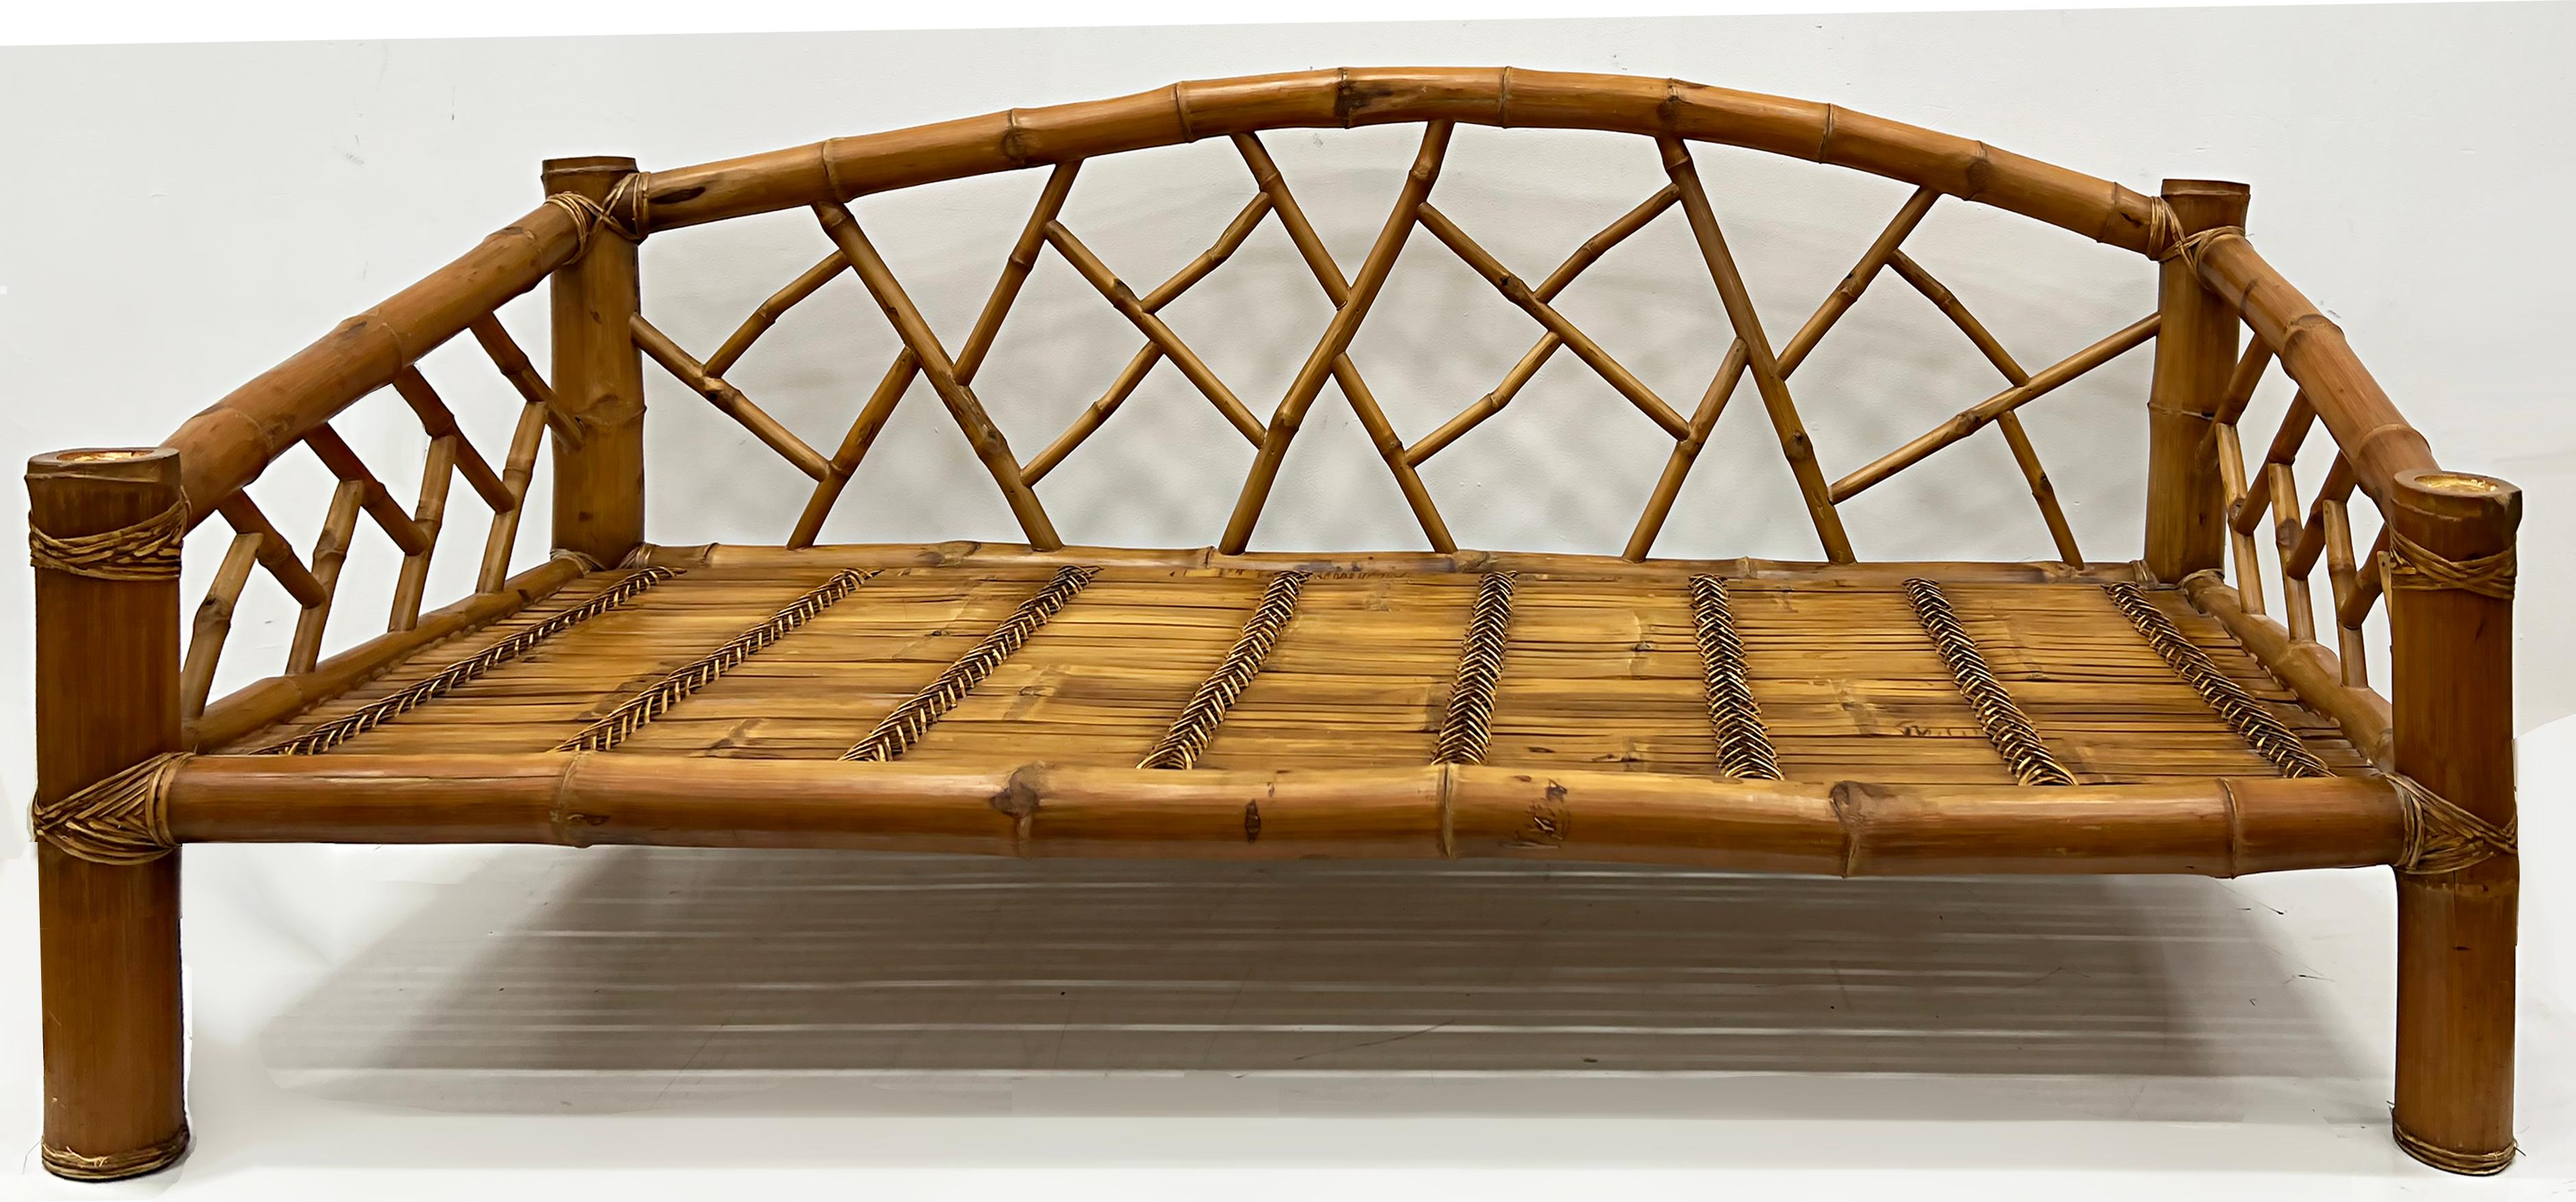 1987 Coastal bamboo rattan sofa by Antonio Budji Layug

Offered for sale is a 1987 bamboo sofa with rattan accents by Antonio Budji Layug. This sofa is dramatic and sculptural. The scale of the materials makes it quite substantial. The sofa was